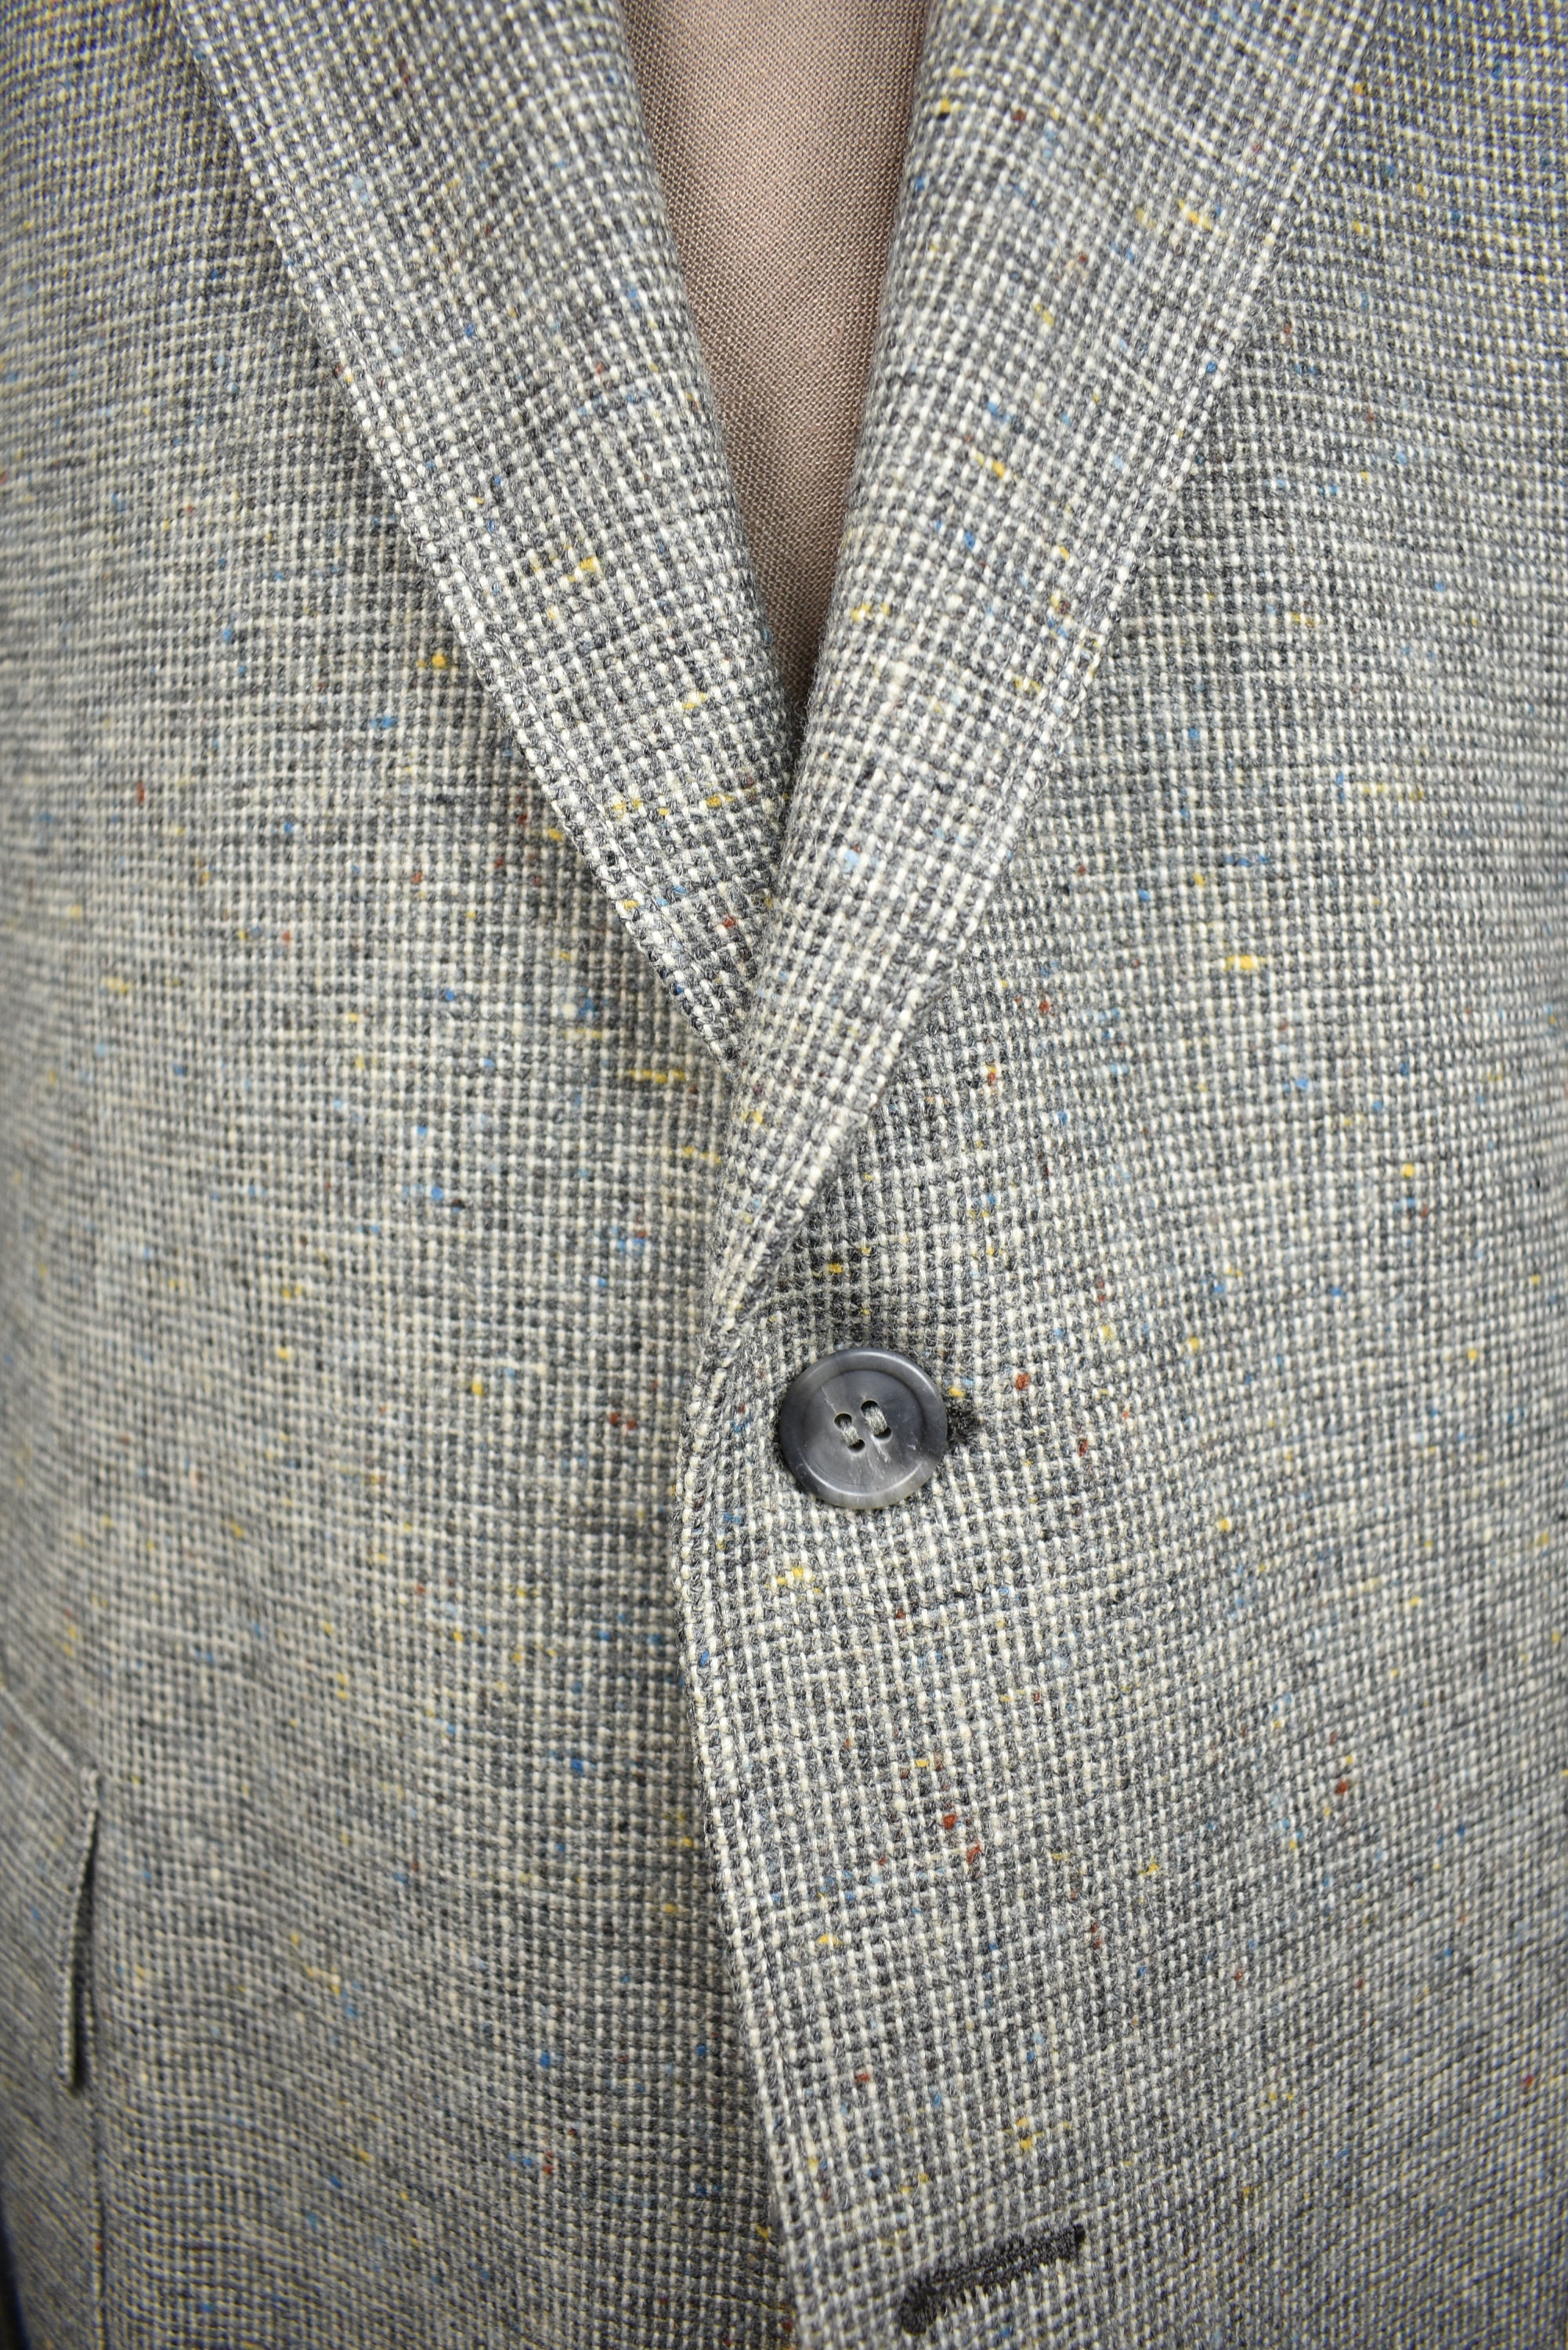 1970's Cricketeer Gray Wool Two Button Sport Coat Size: 40L - Etsy